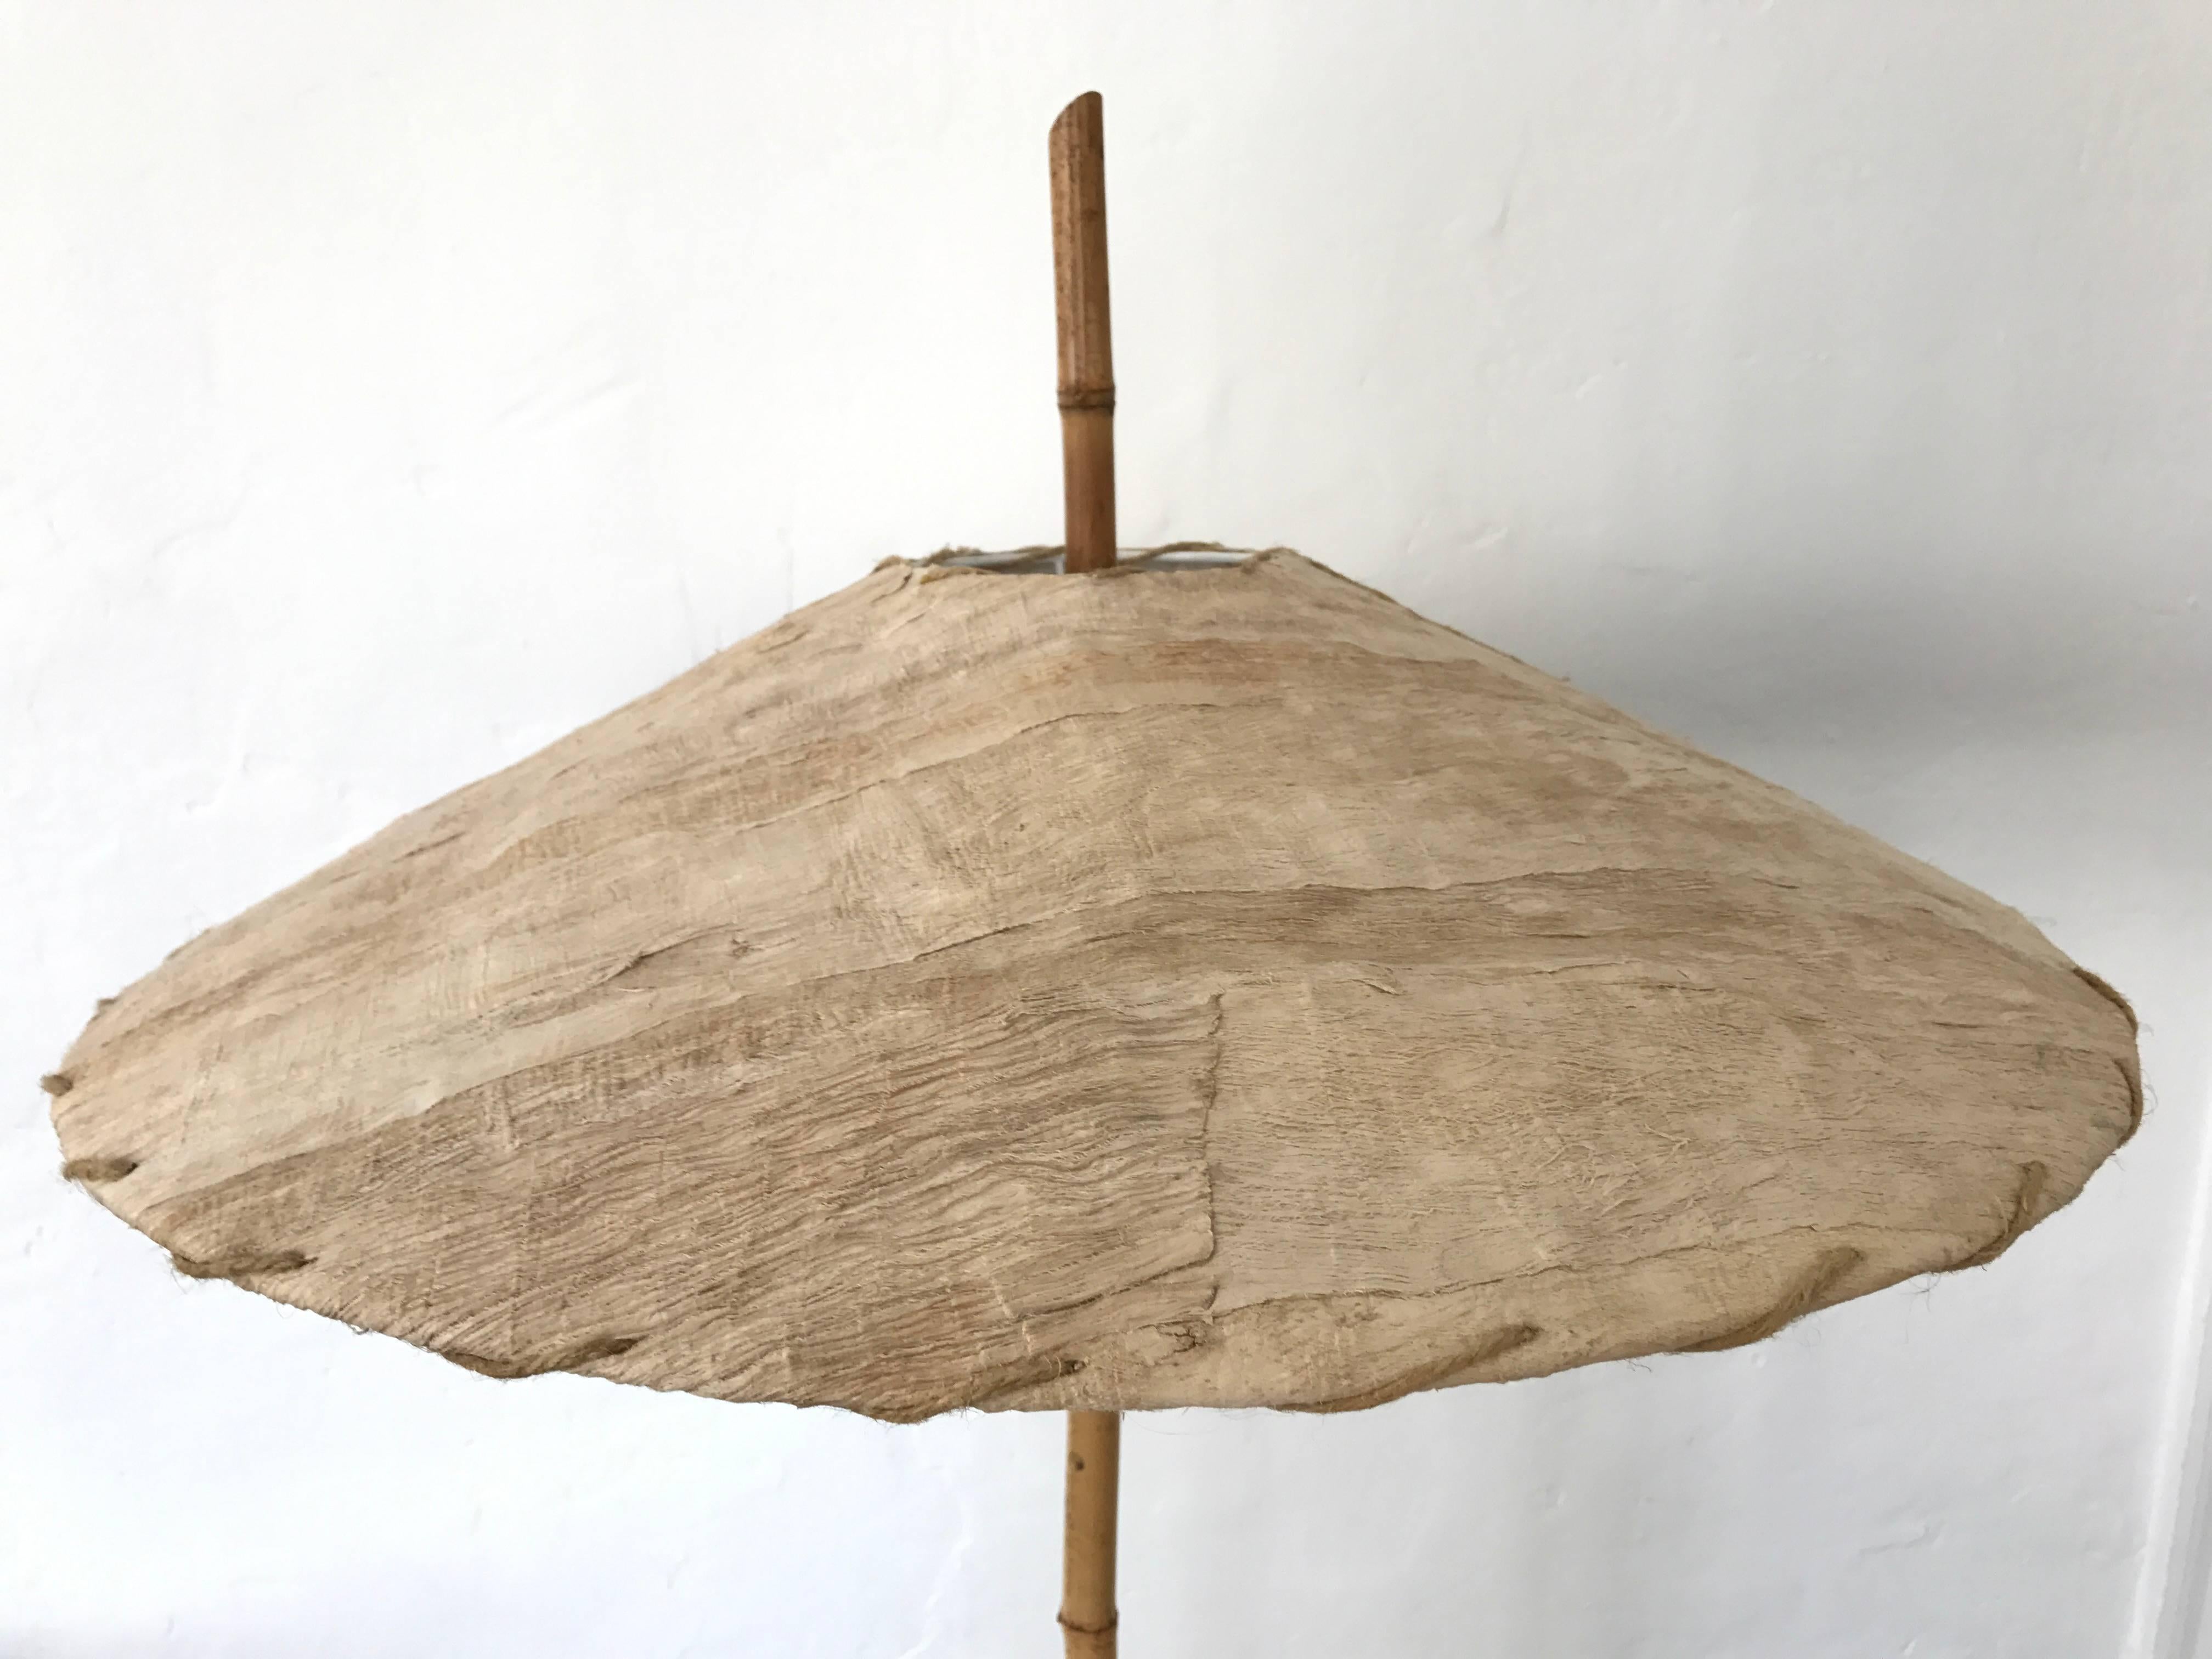 Rare bamboo, handmade palm bark shade and stone base floor lamp by Robert Sonneman for George Kovacs, signed and dated.